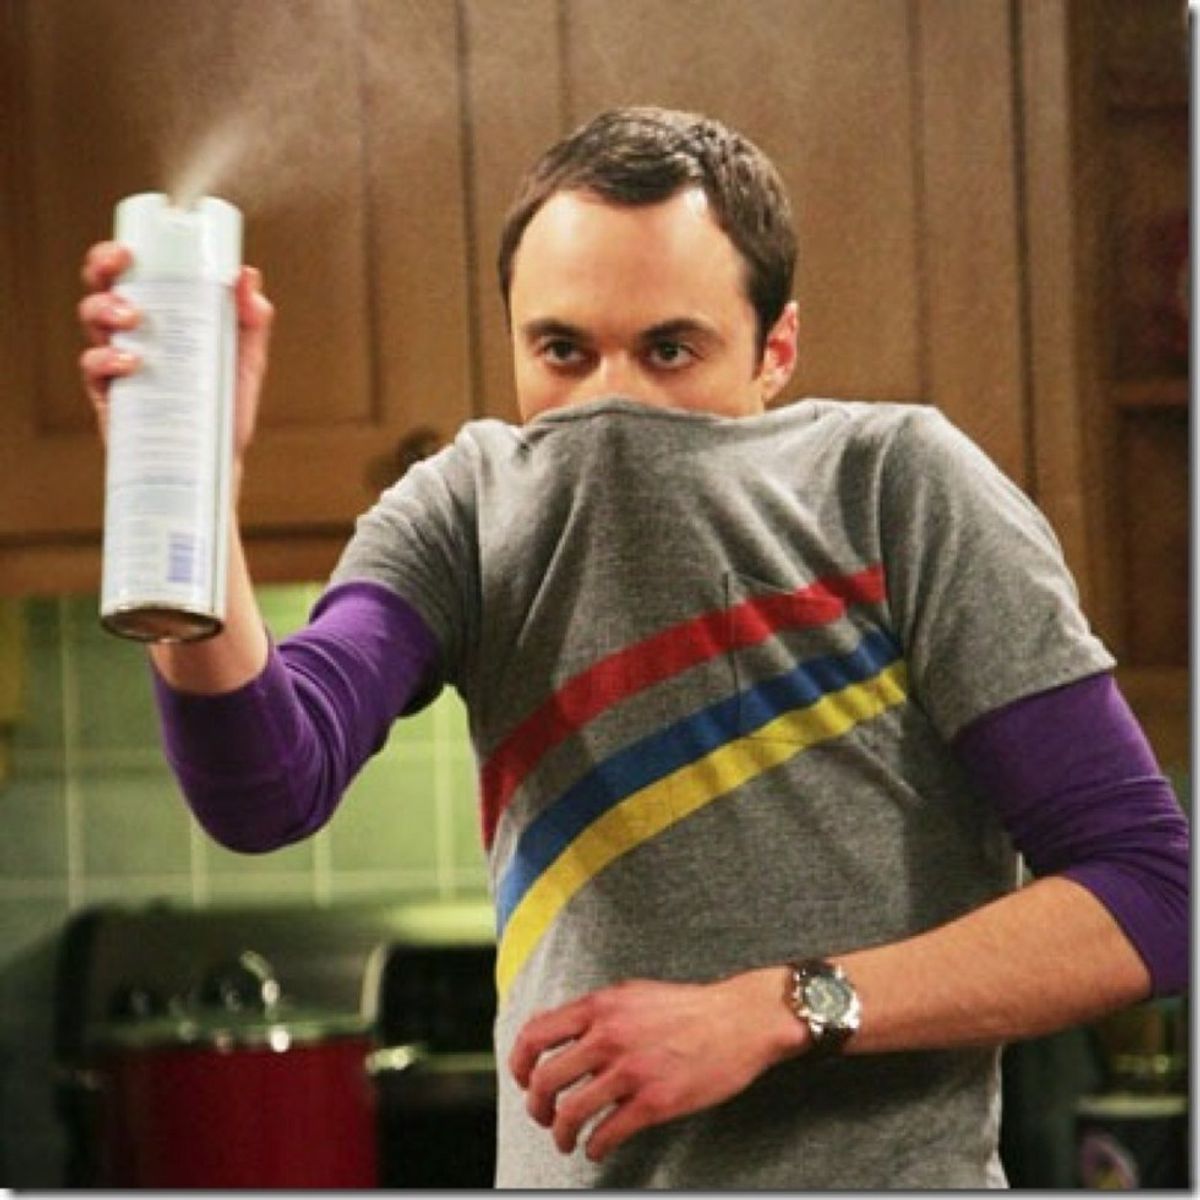 15 Times We All Personally Related To Sheldon Cooper